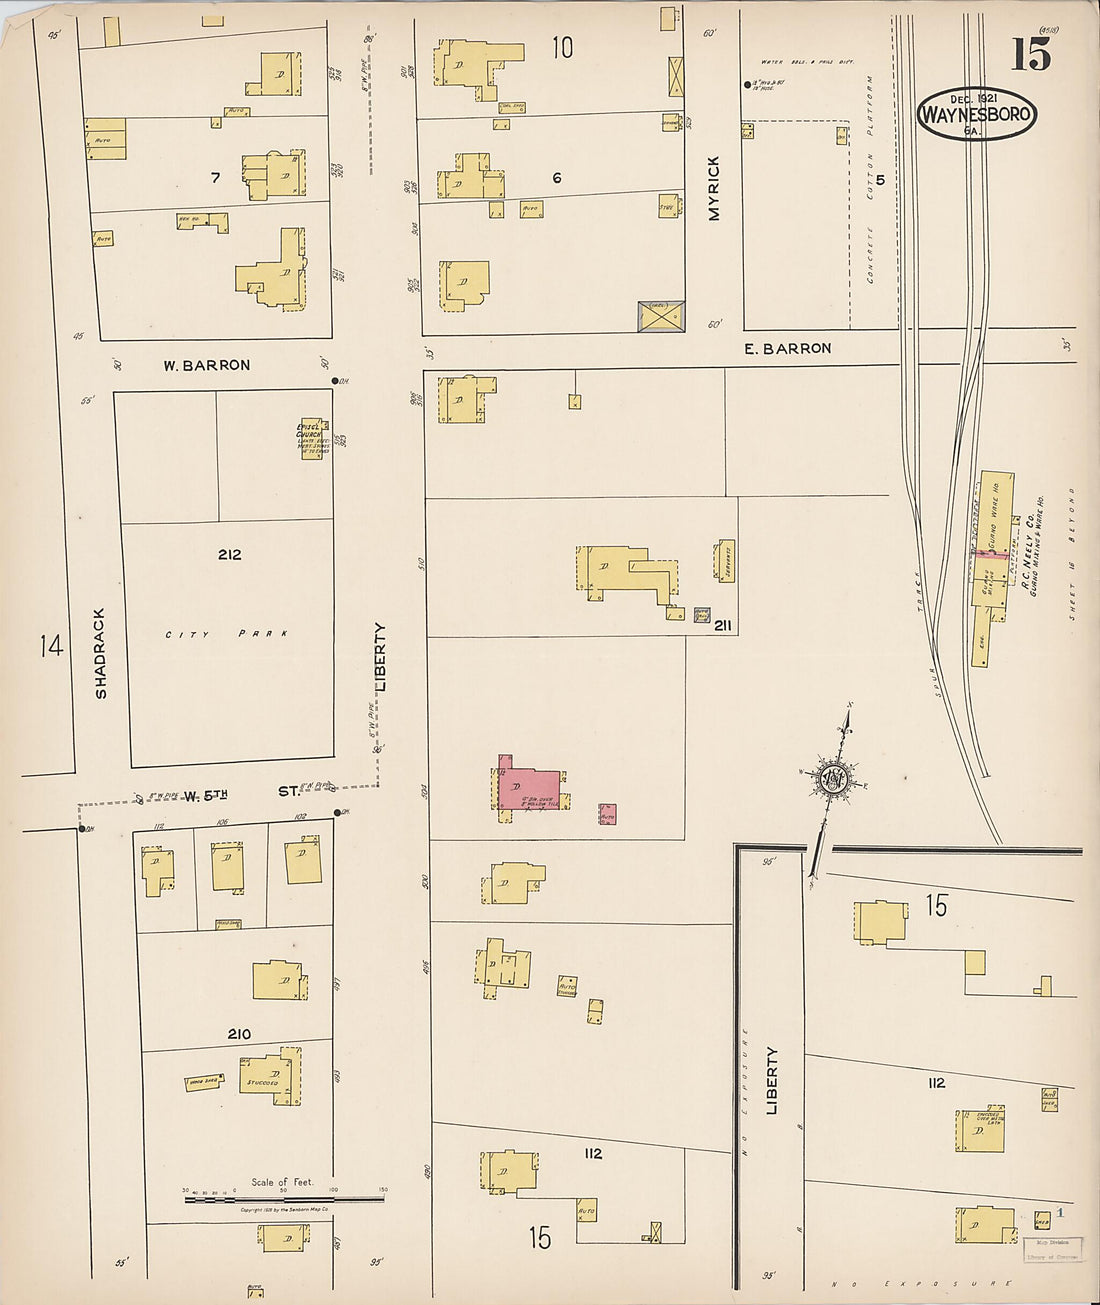 This old map of Waynesboro, Burke County, Georgia was created by Sanborn Map Company in 1921